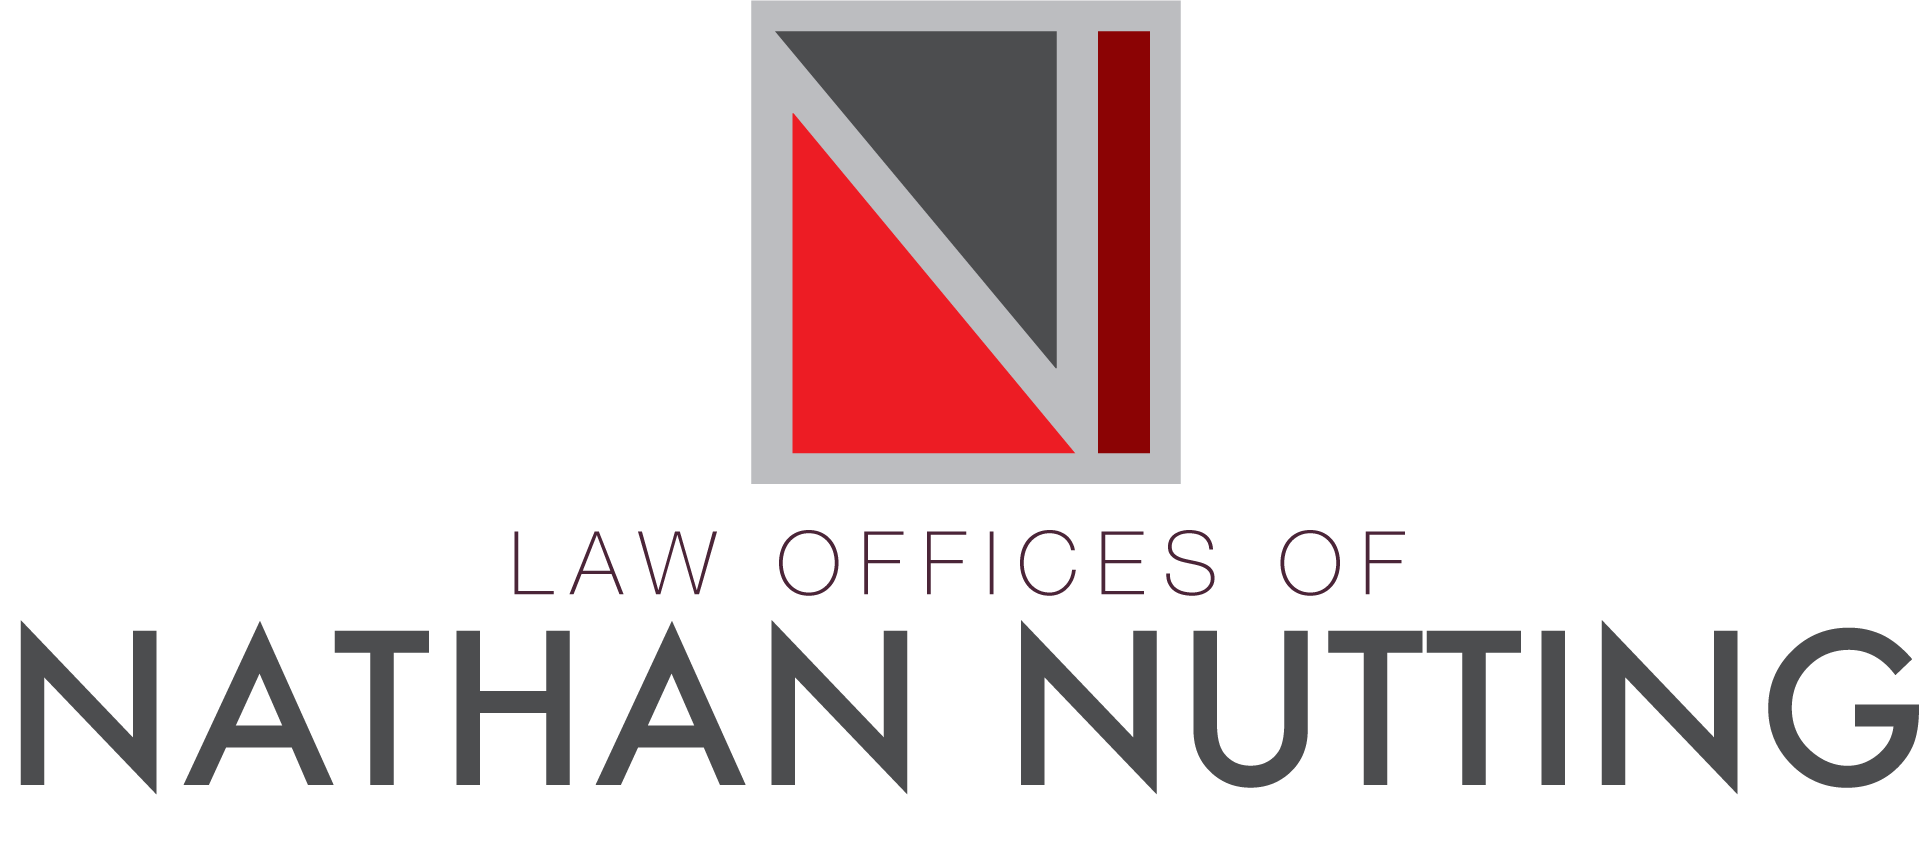 Law offices of Nathan Nutting